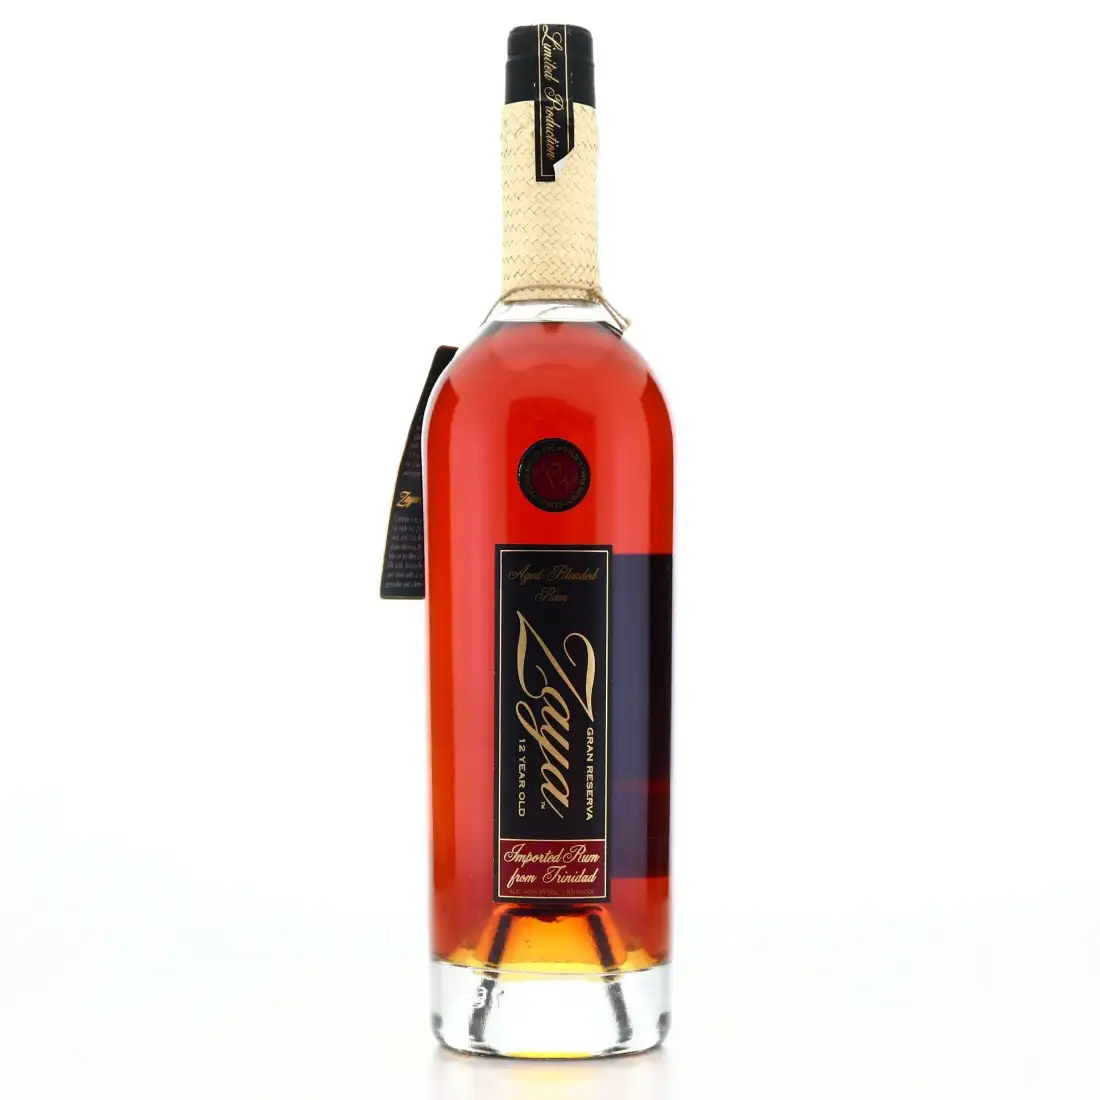 Image of the front of the bottle of the rum Zaya Rum Gran Reserva 12 Year Old